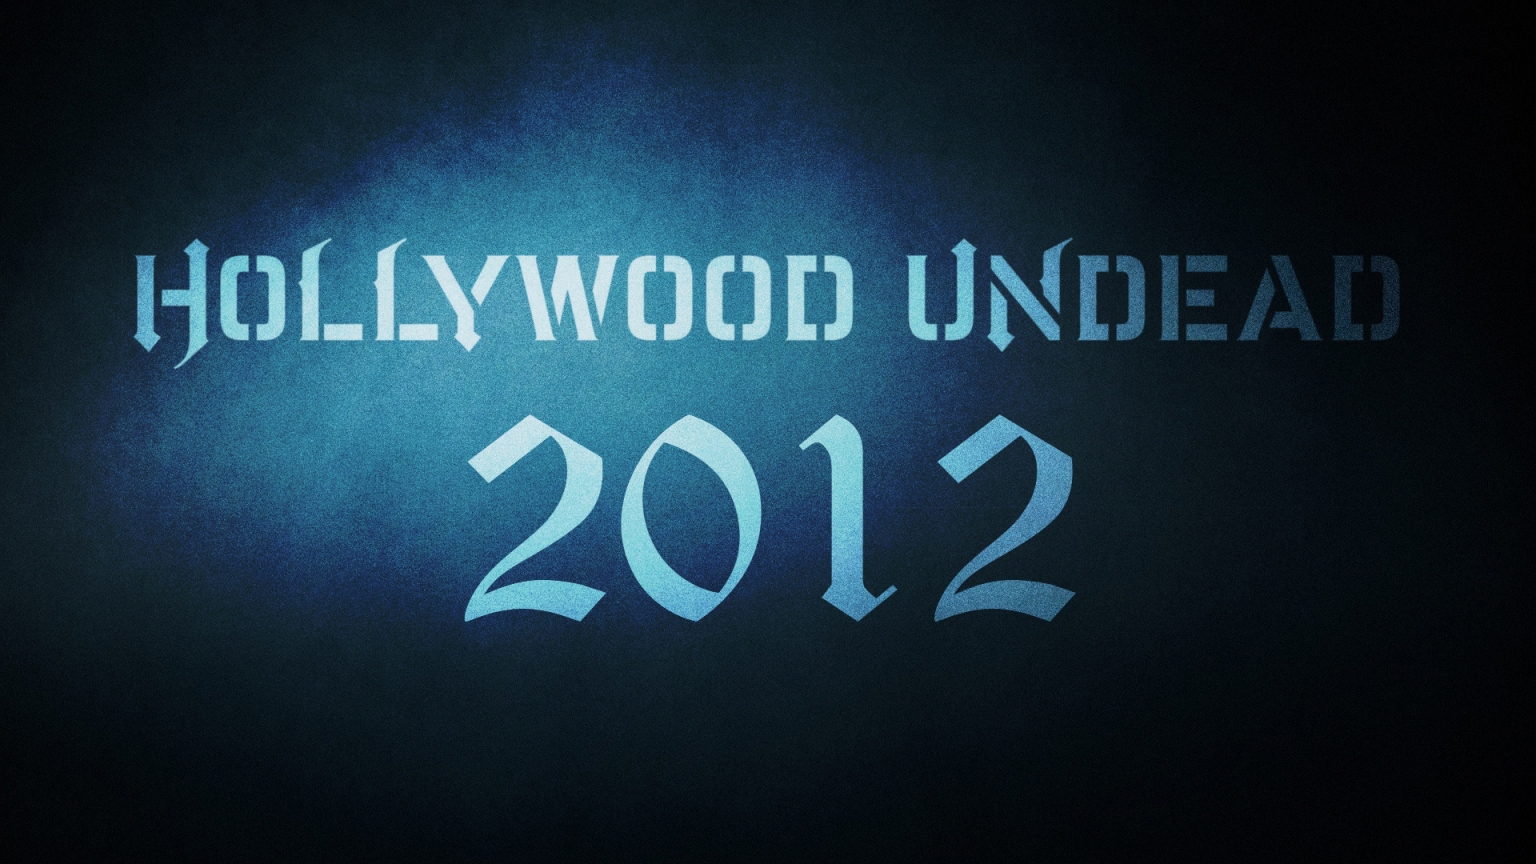 Hollywood Undead 2012 for 1536 x 864 HDTV resolution